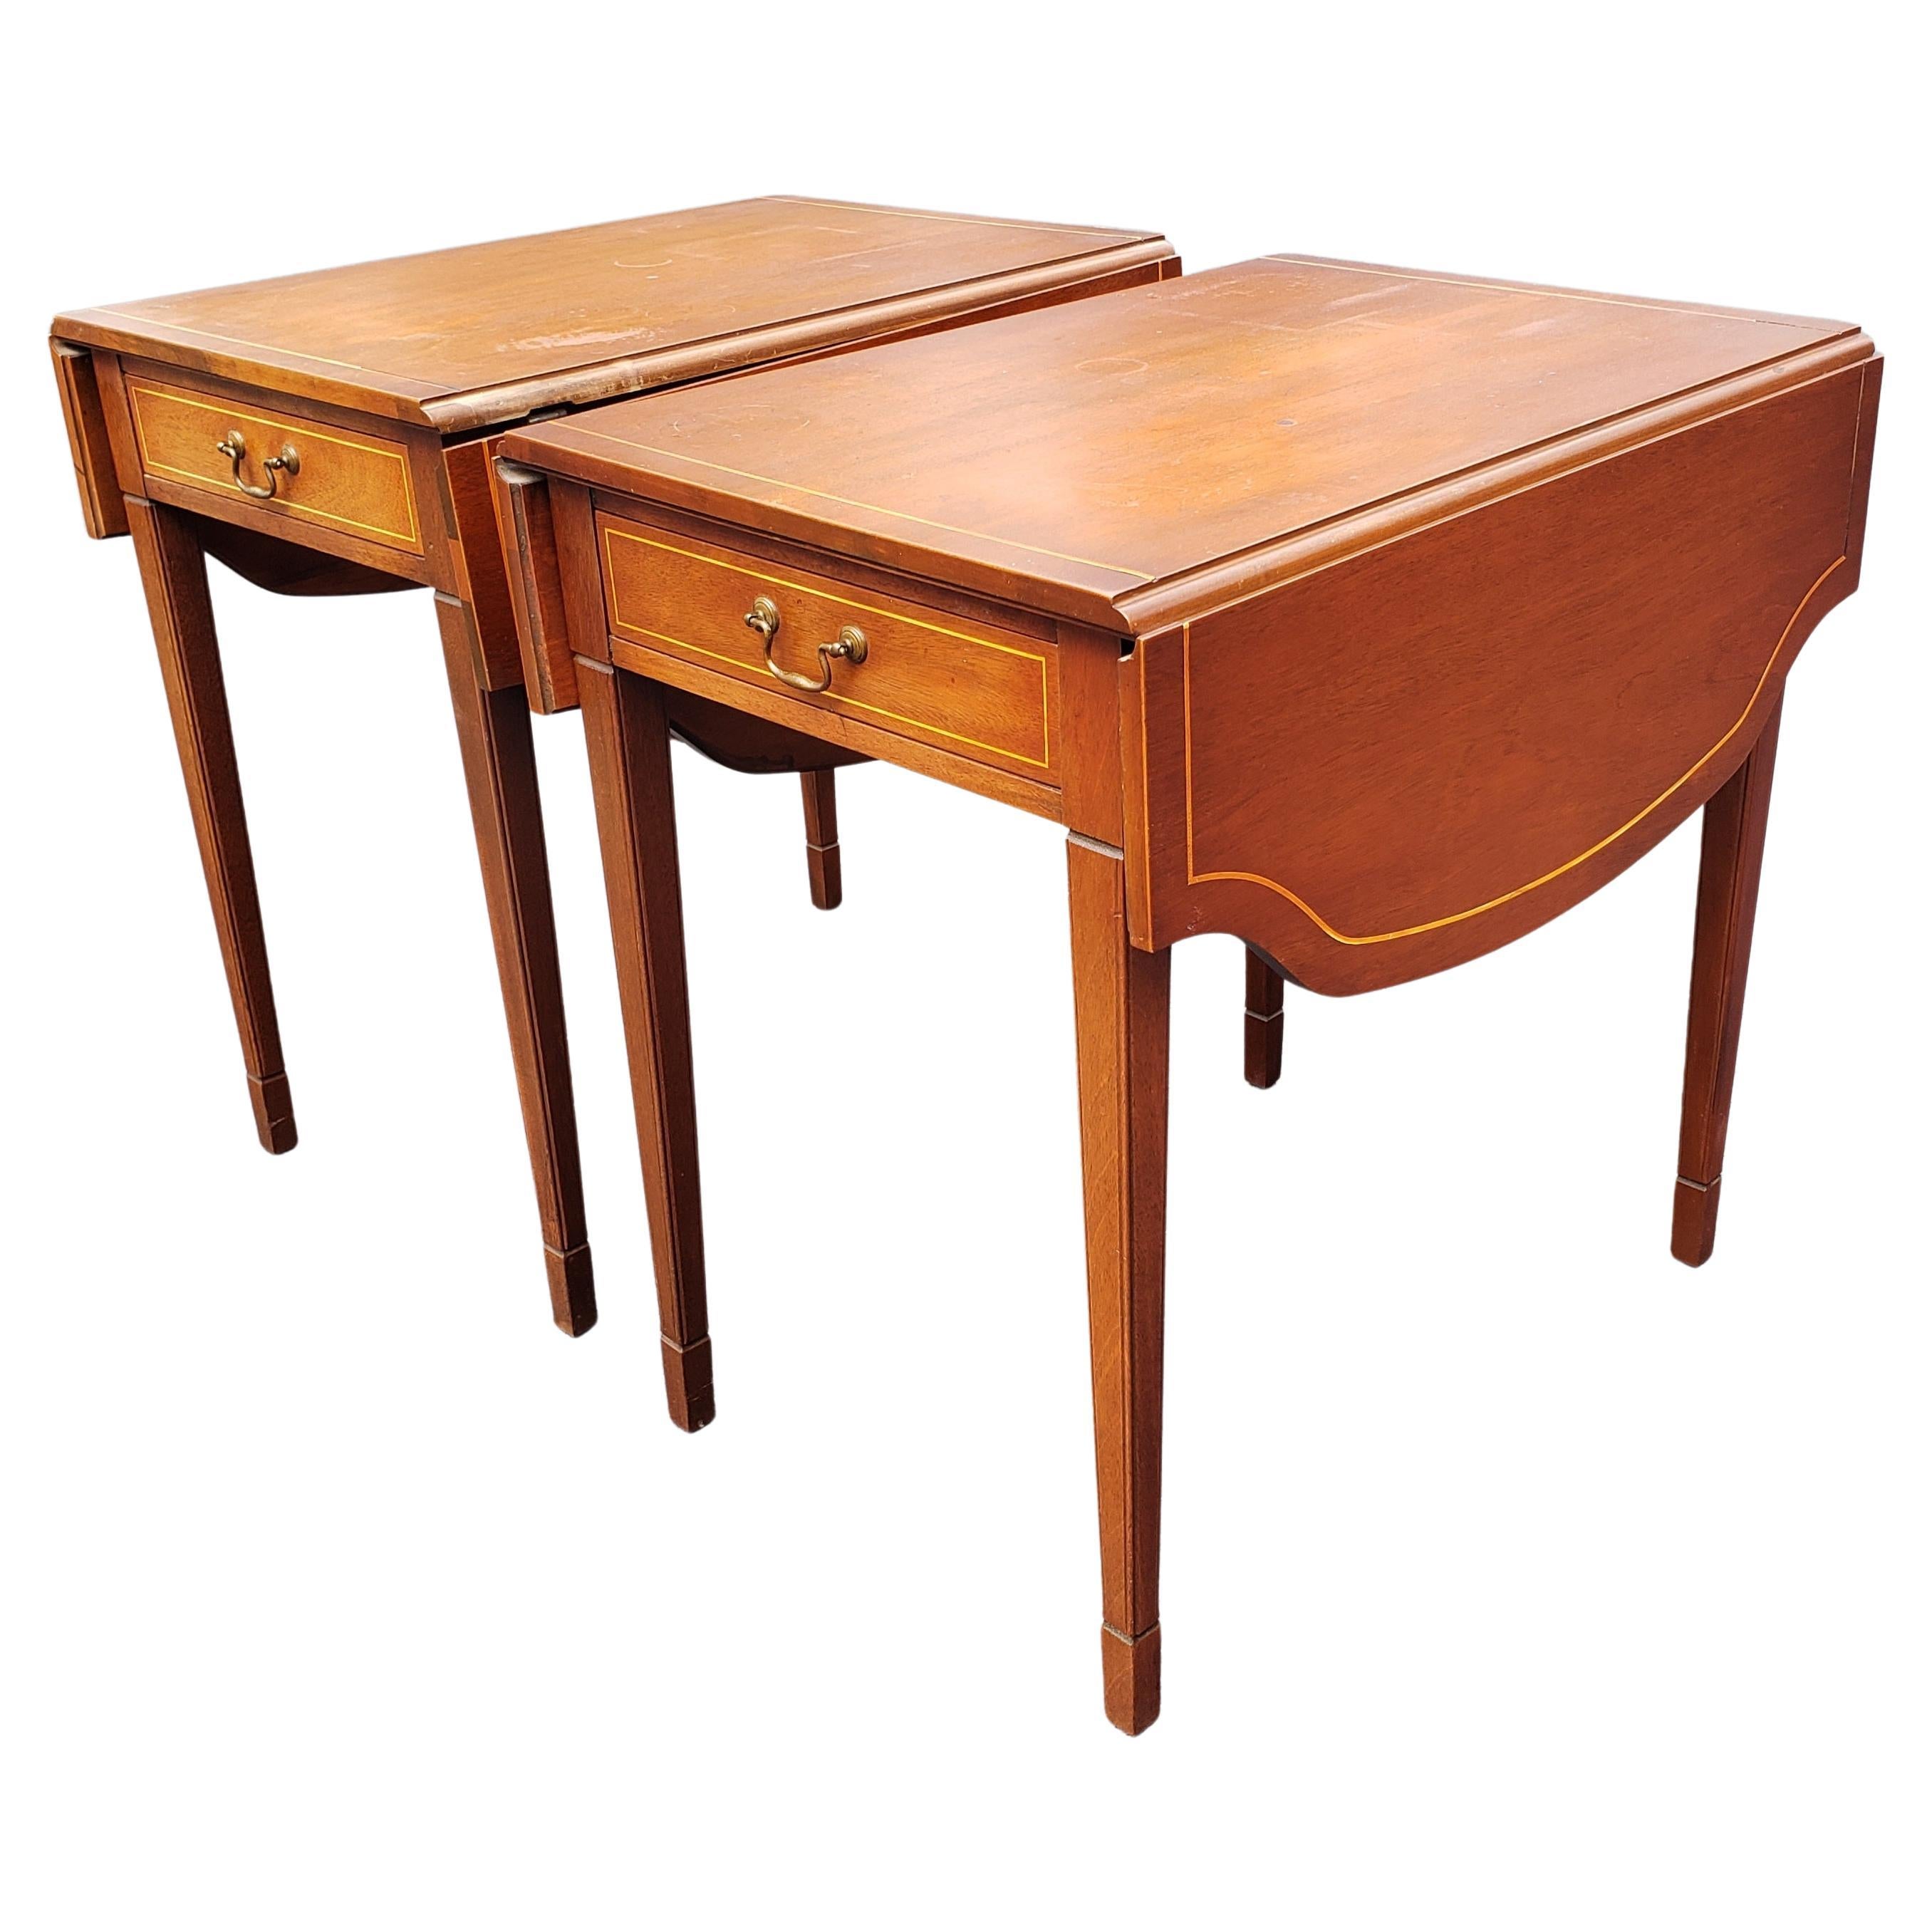 Exquisite pair of Brandt Furniture Certified Genuine Mahogany Pembroke Drop-Leaf Tables from the 1940s. Good vintage condition. 
One functional drawer. Table seems to have been refinished at some point. Some wear appropriate with age and use.